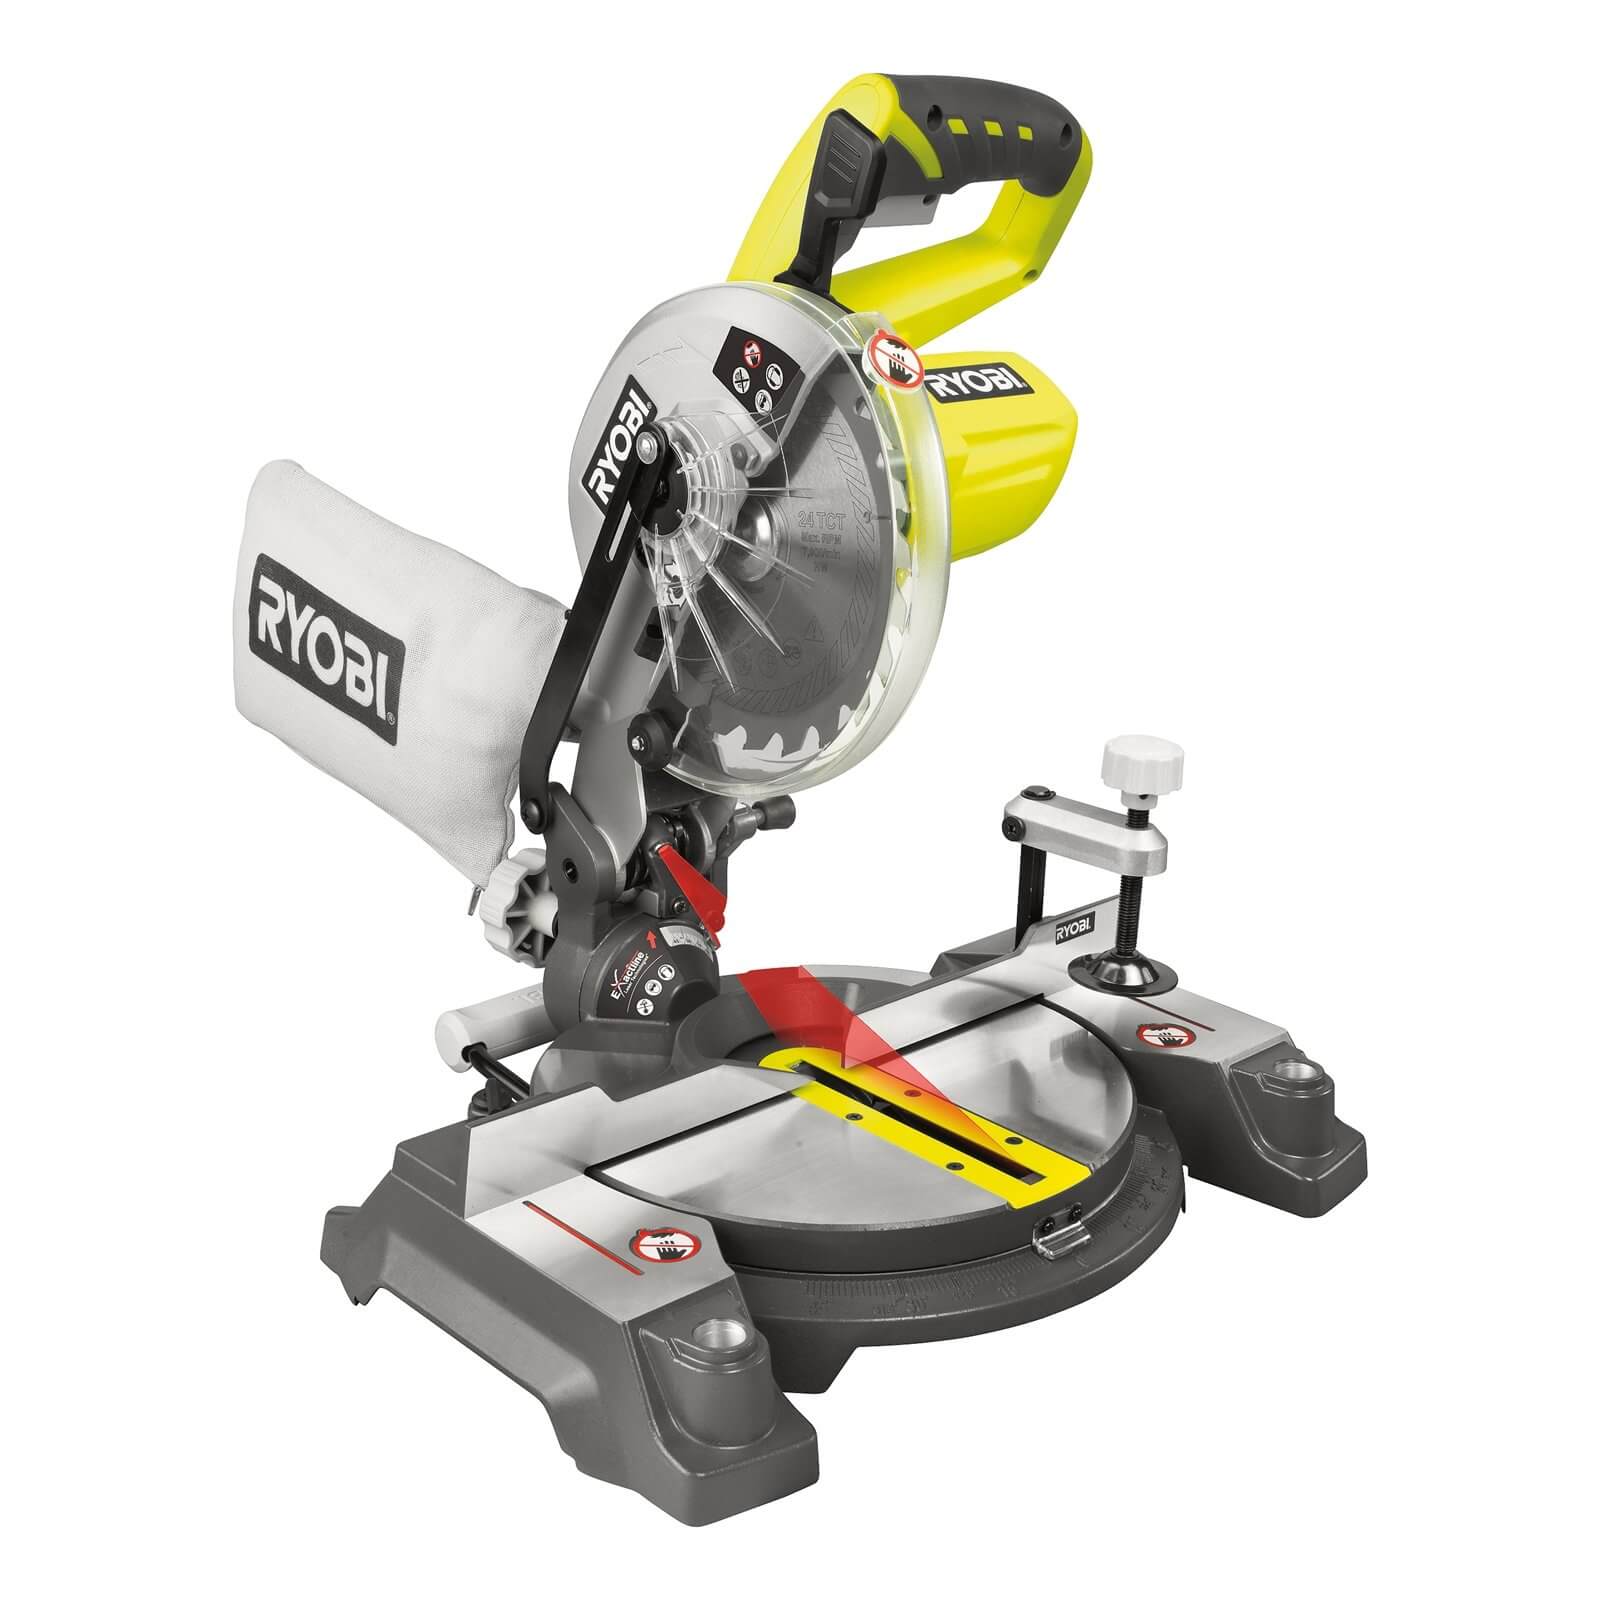 Ryobi ONE+ 18V 190mm Mitre Saw EMS190DCL (Tool only)